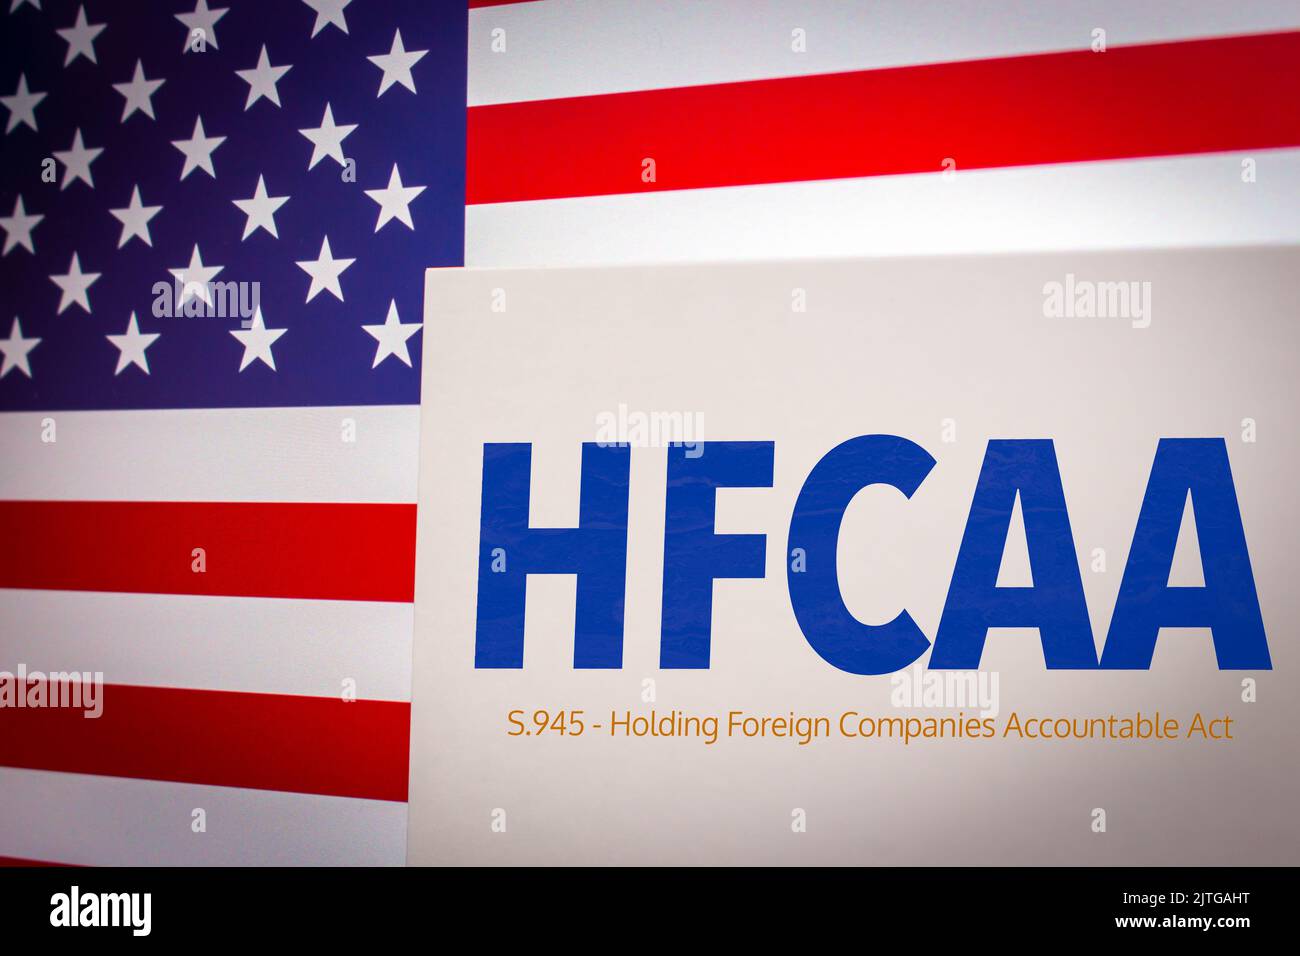 Conceptual keyword HFCAA (Holding Foreign Companies Accountable Act) on card on an US flag background. Chinese businesses in USA concept Stock Photo